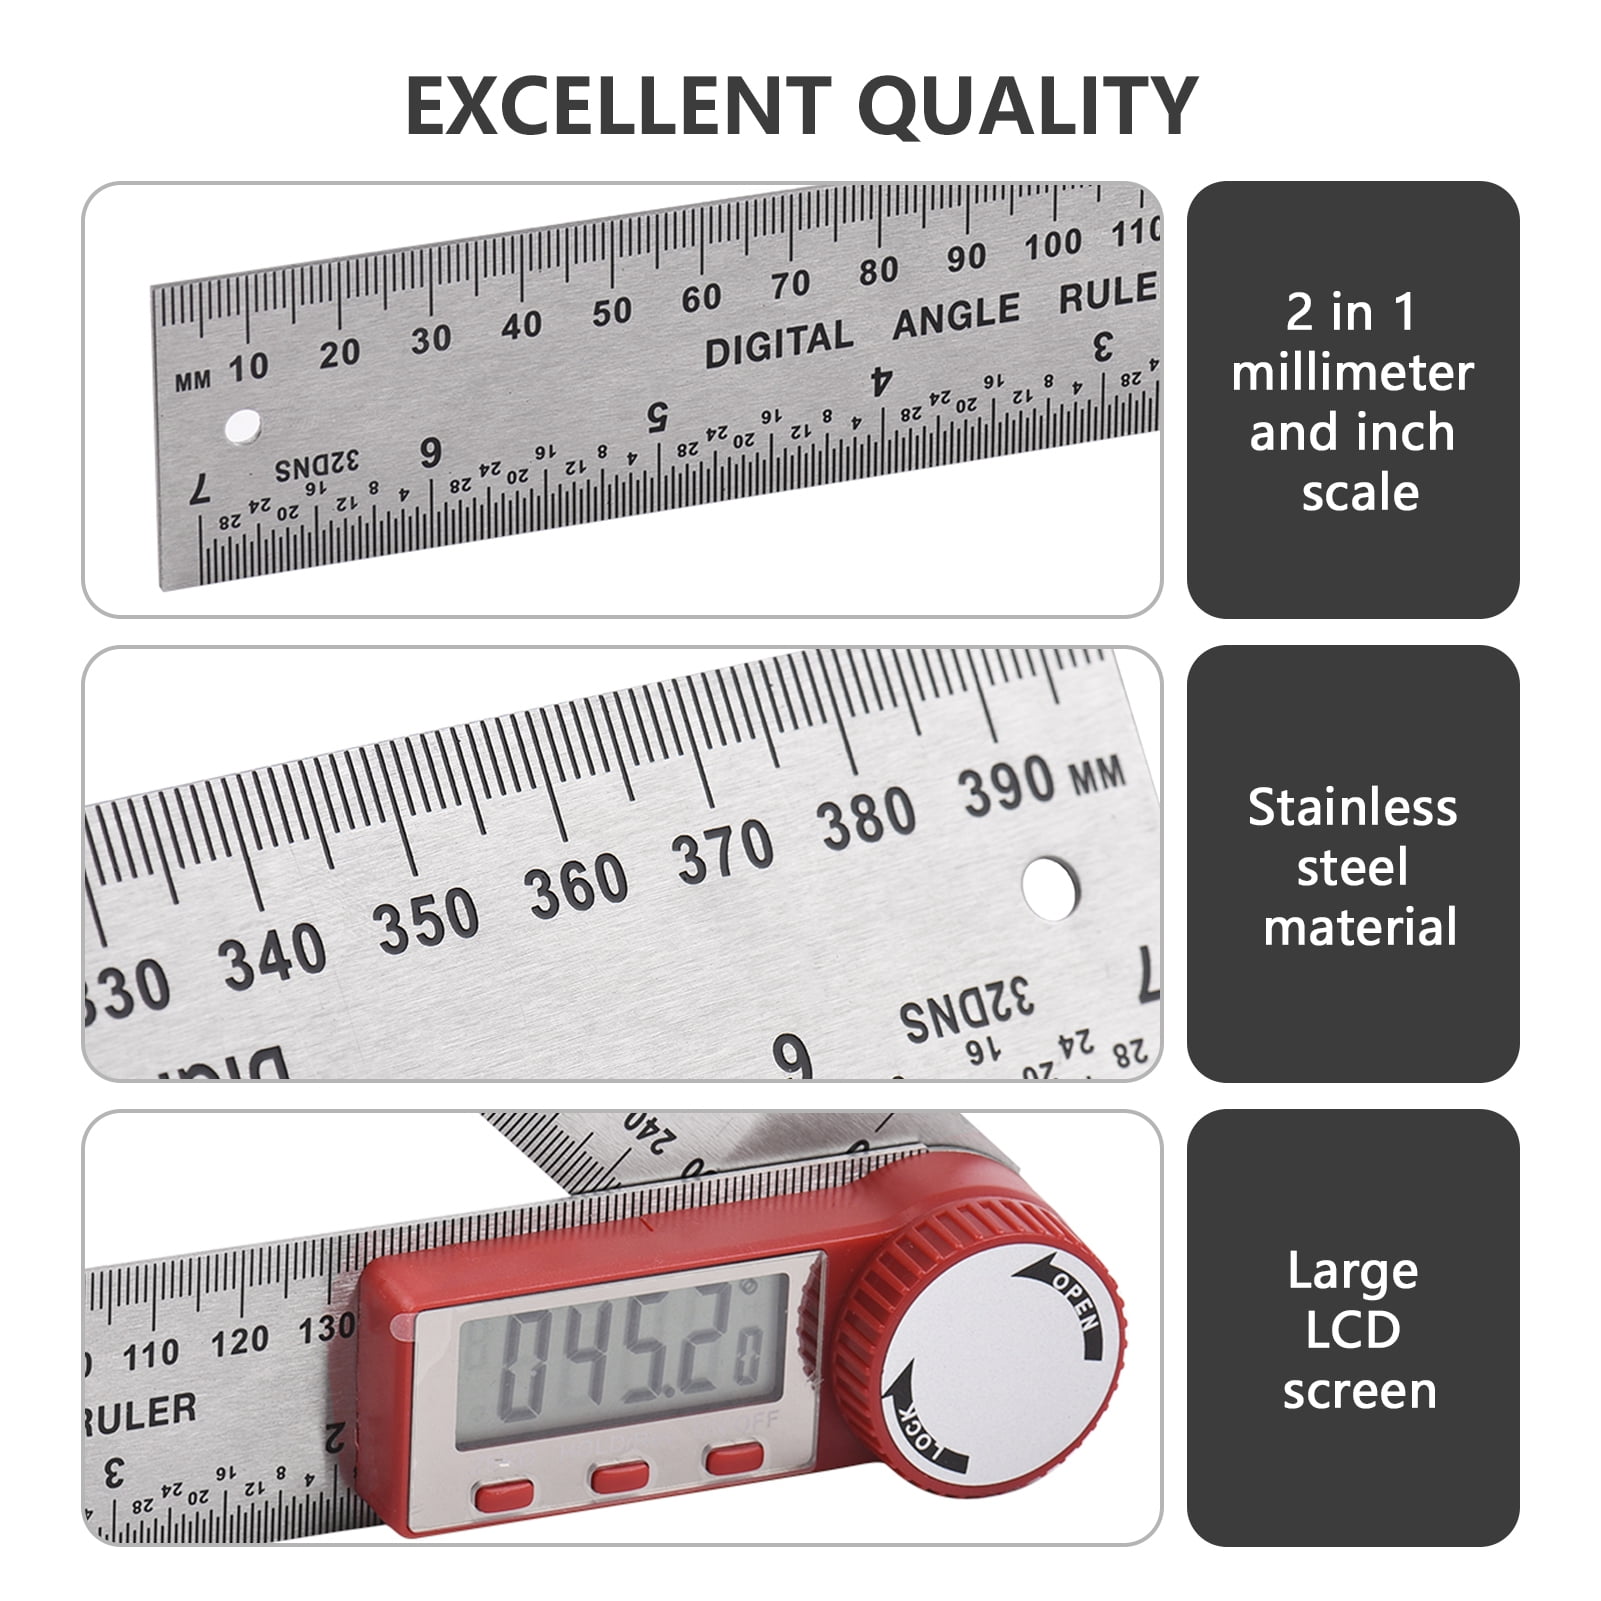 6-039R_200MM 2-in-1 Digital Protractor Electronic Angle Ruler 200mm (8